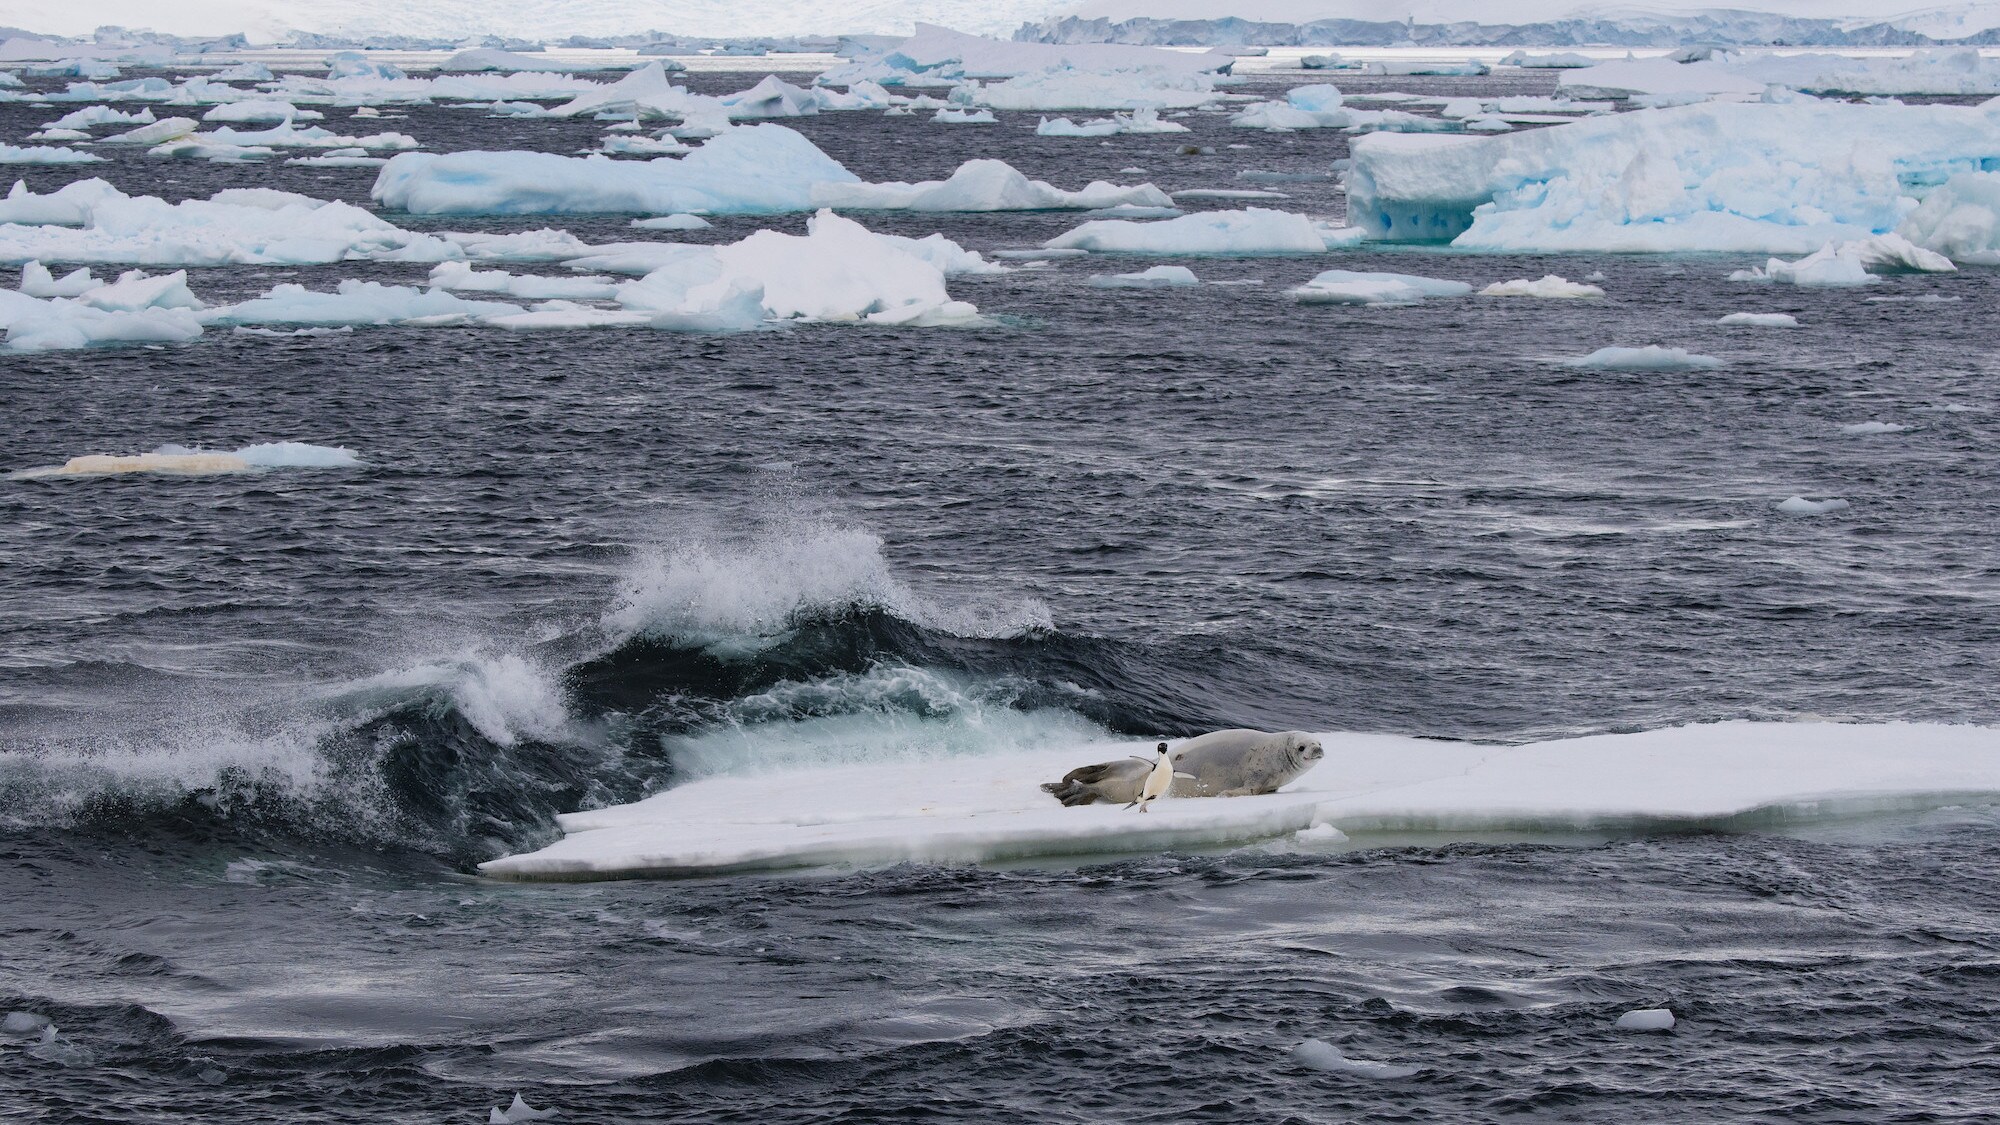 A wave is coming towards the ice flow where a Crabeater Seal and penguin are setting.  (credit: National Geographic for Disney+/Leigh Hickmott)